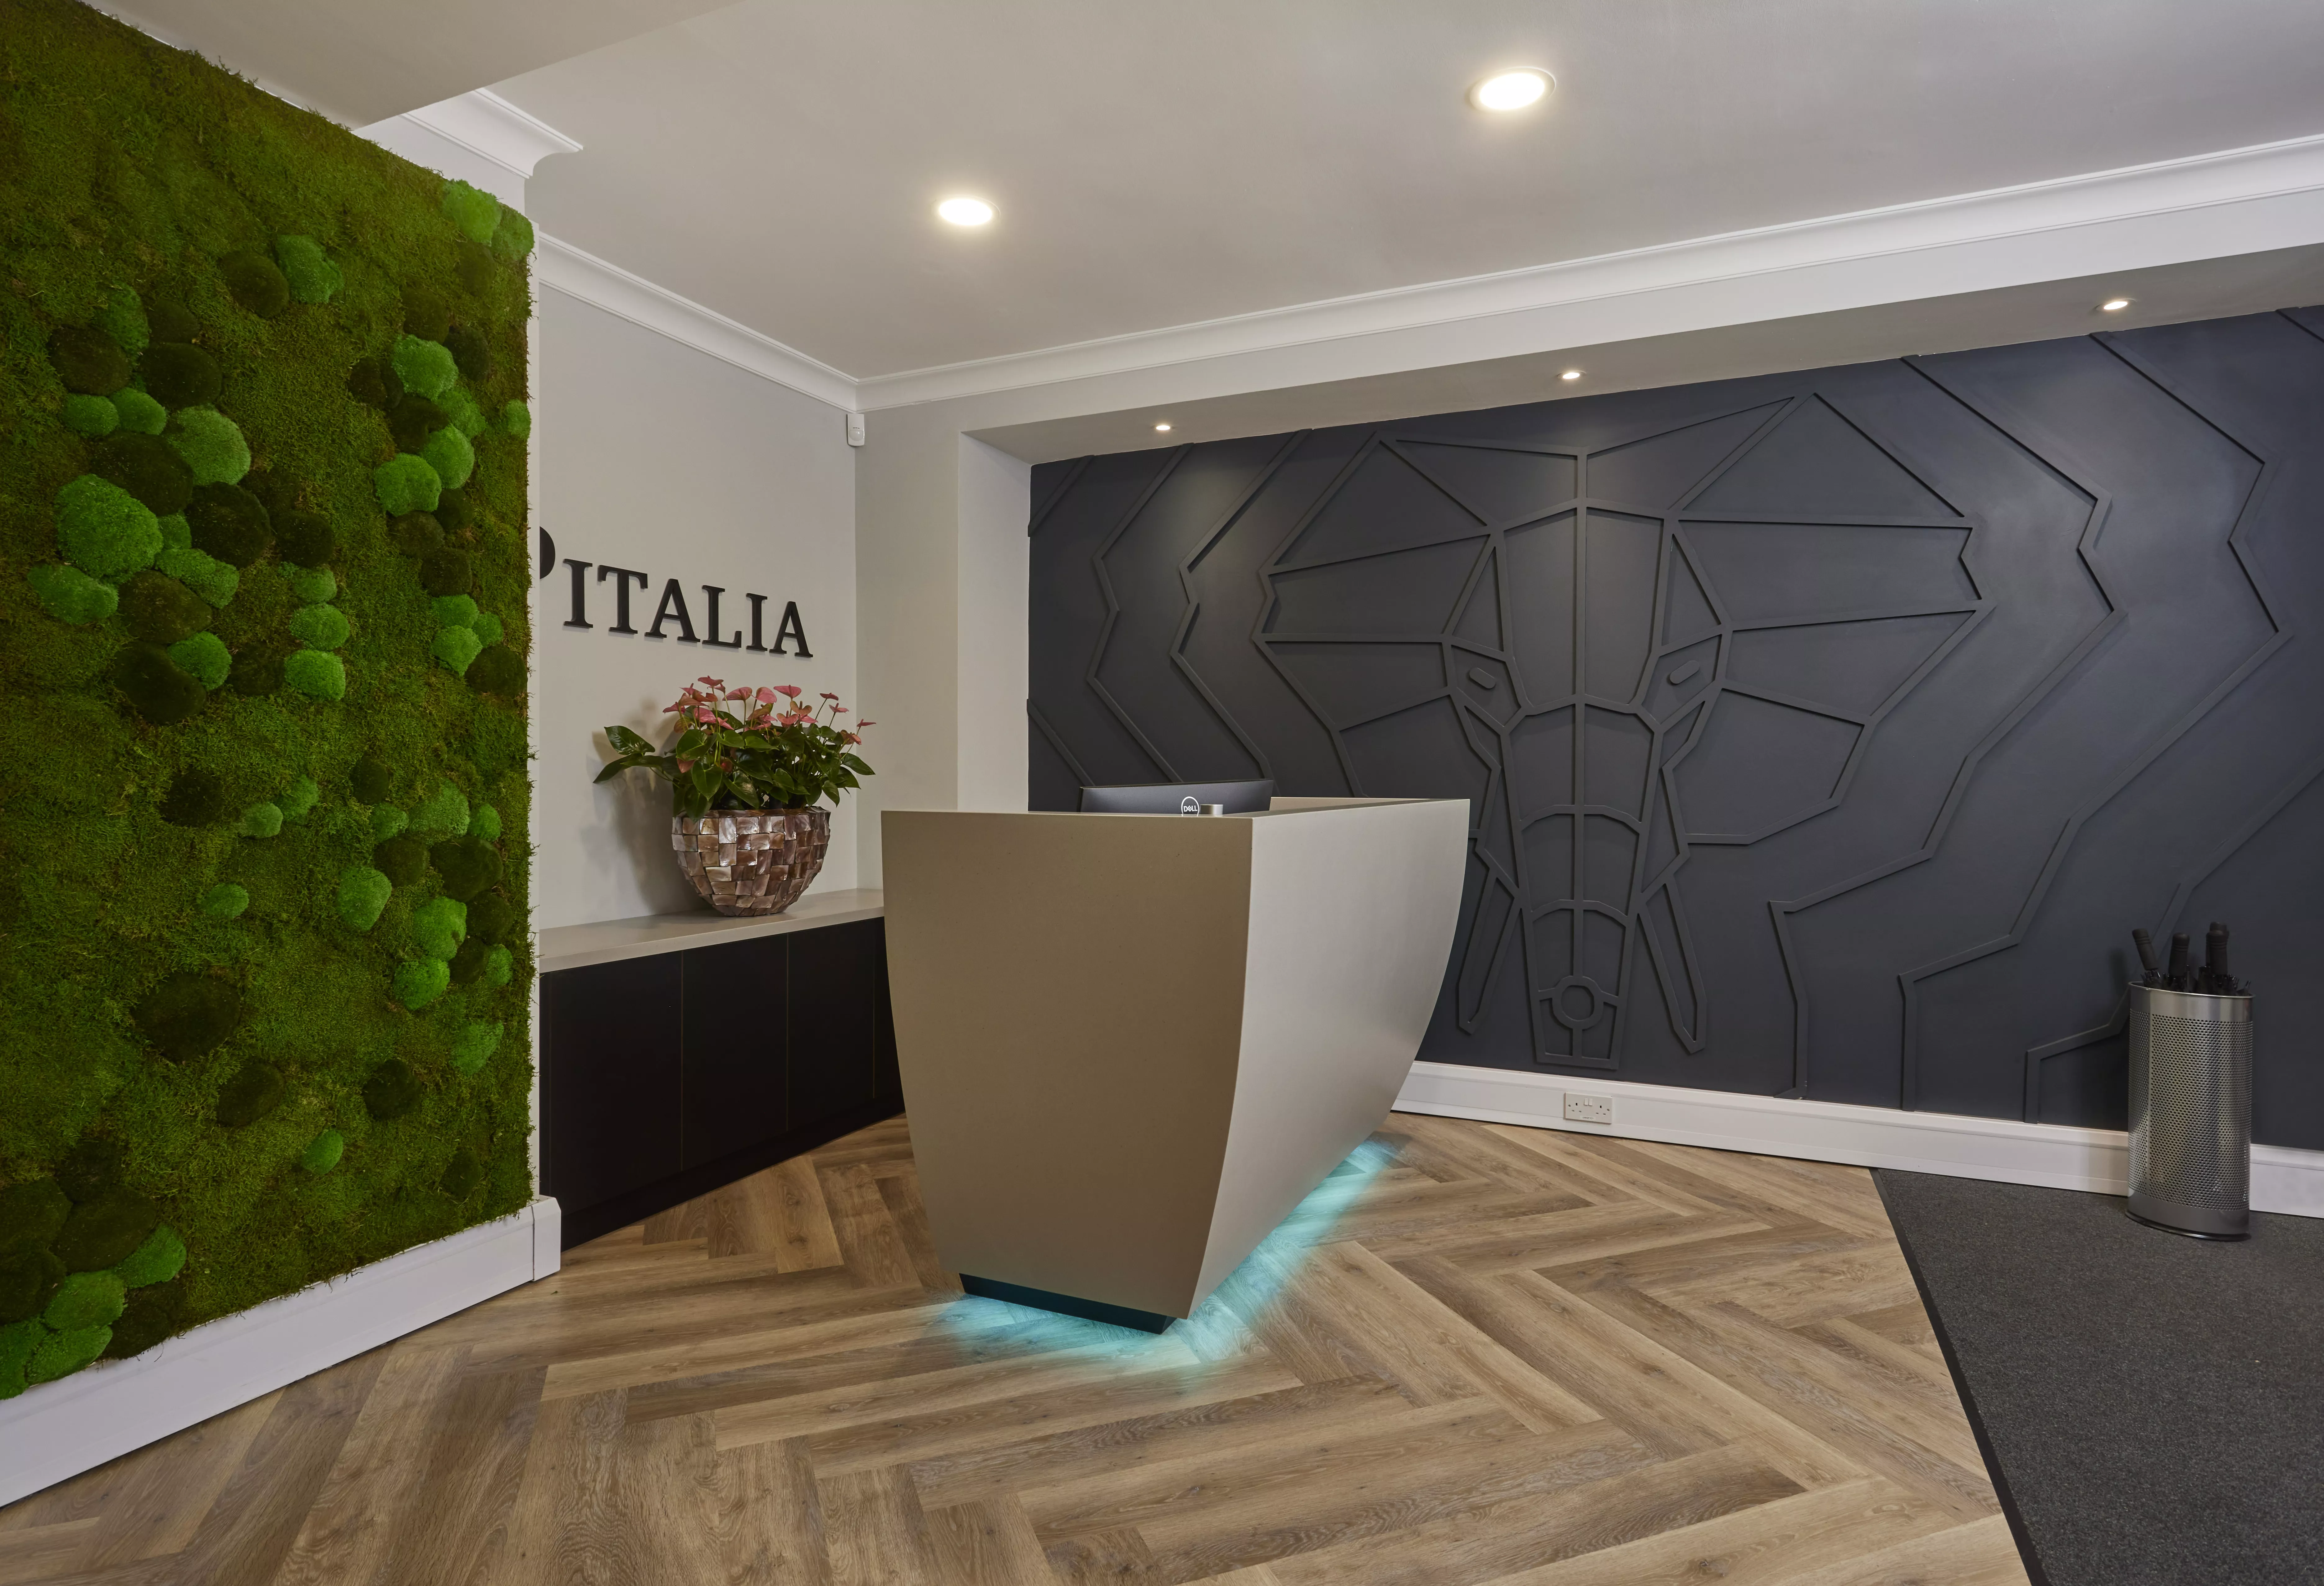 HIMACS creates a striking and sculptural reception desk at Pitalia’s new Manchester office